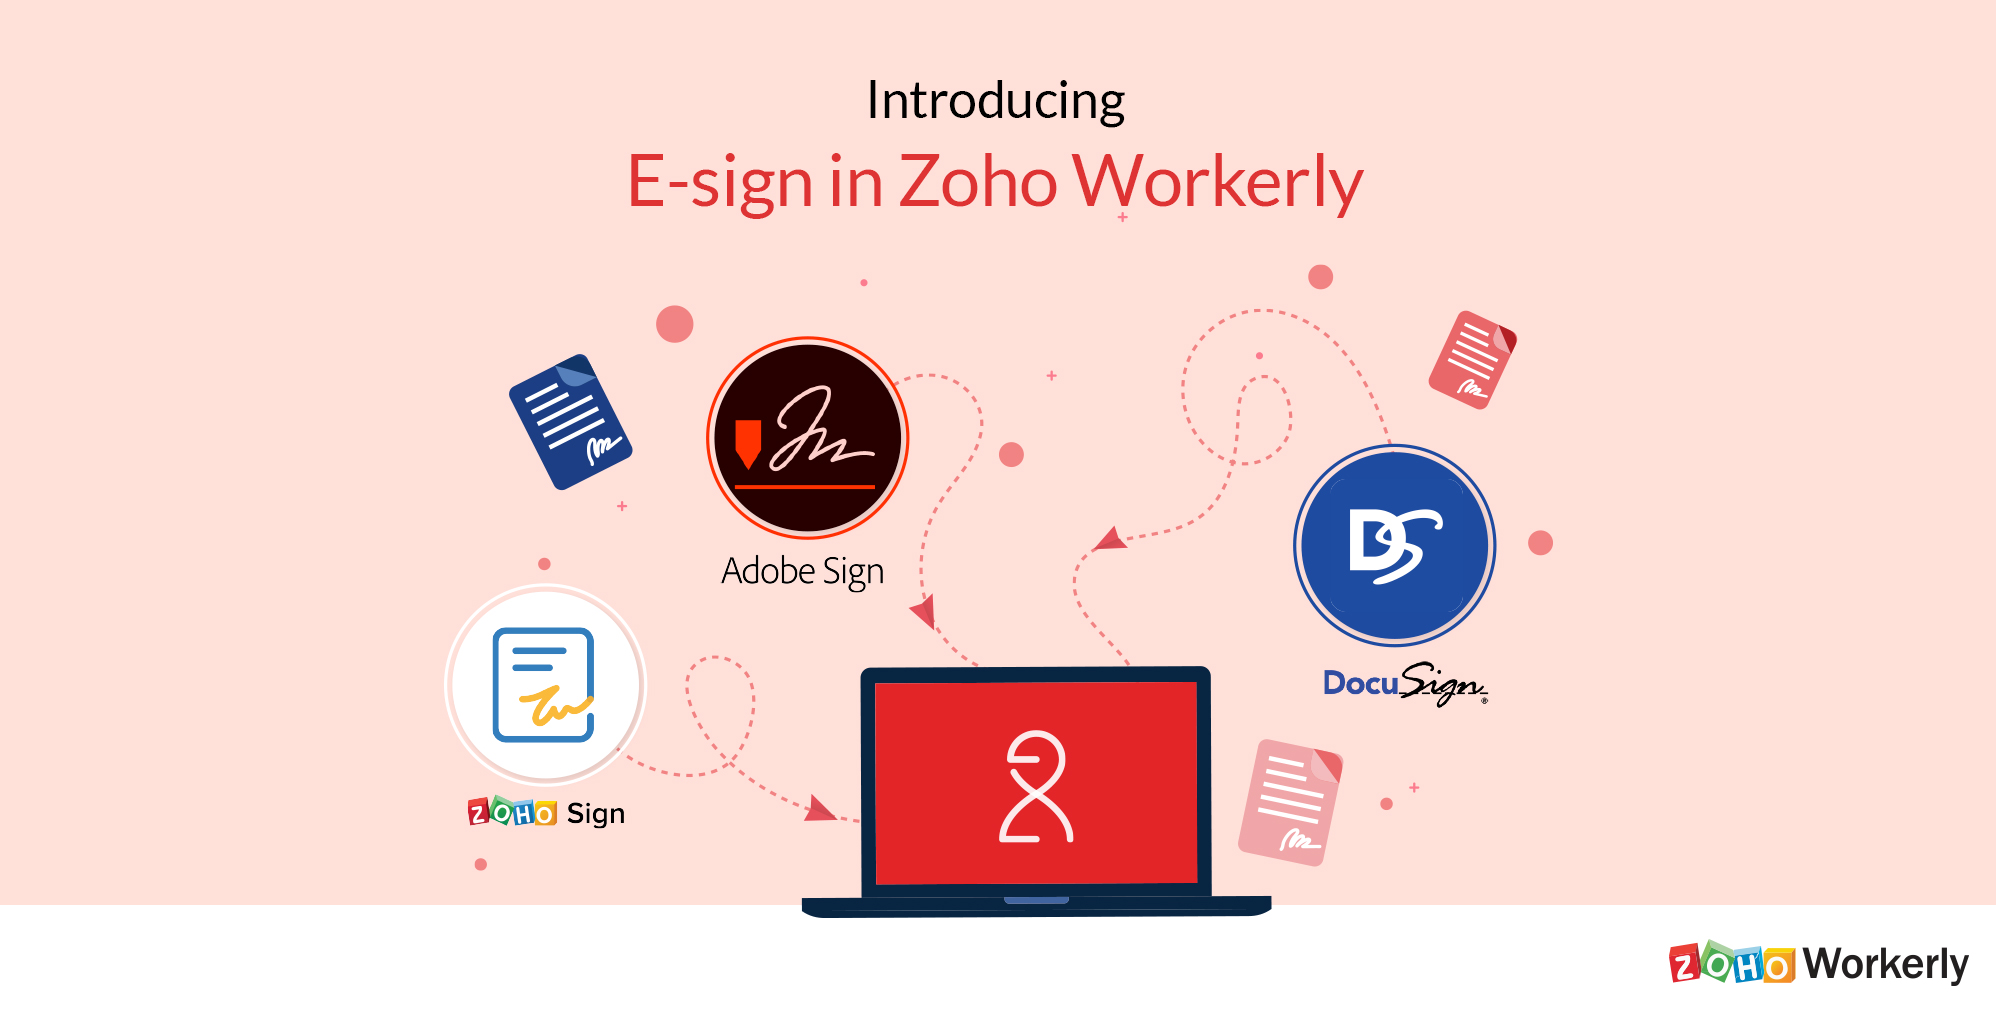 Approvals Made Faster with E-Sign in Zoho Workerly